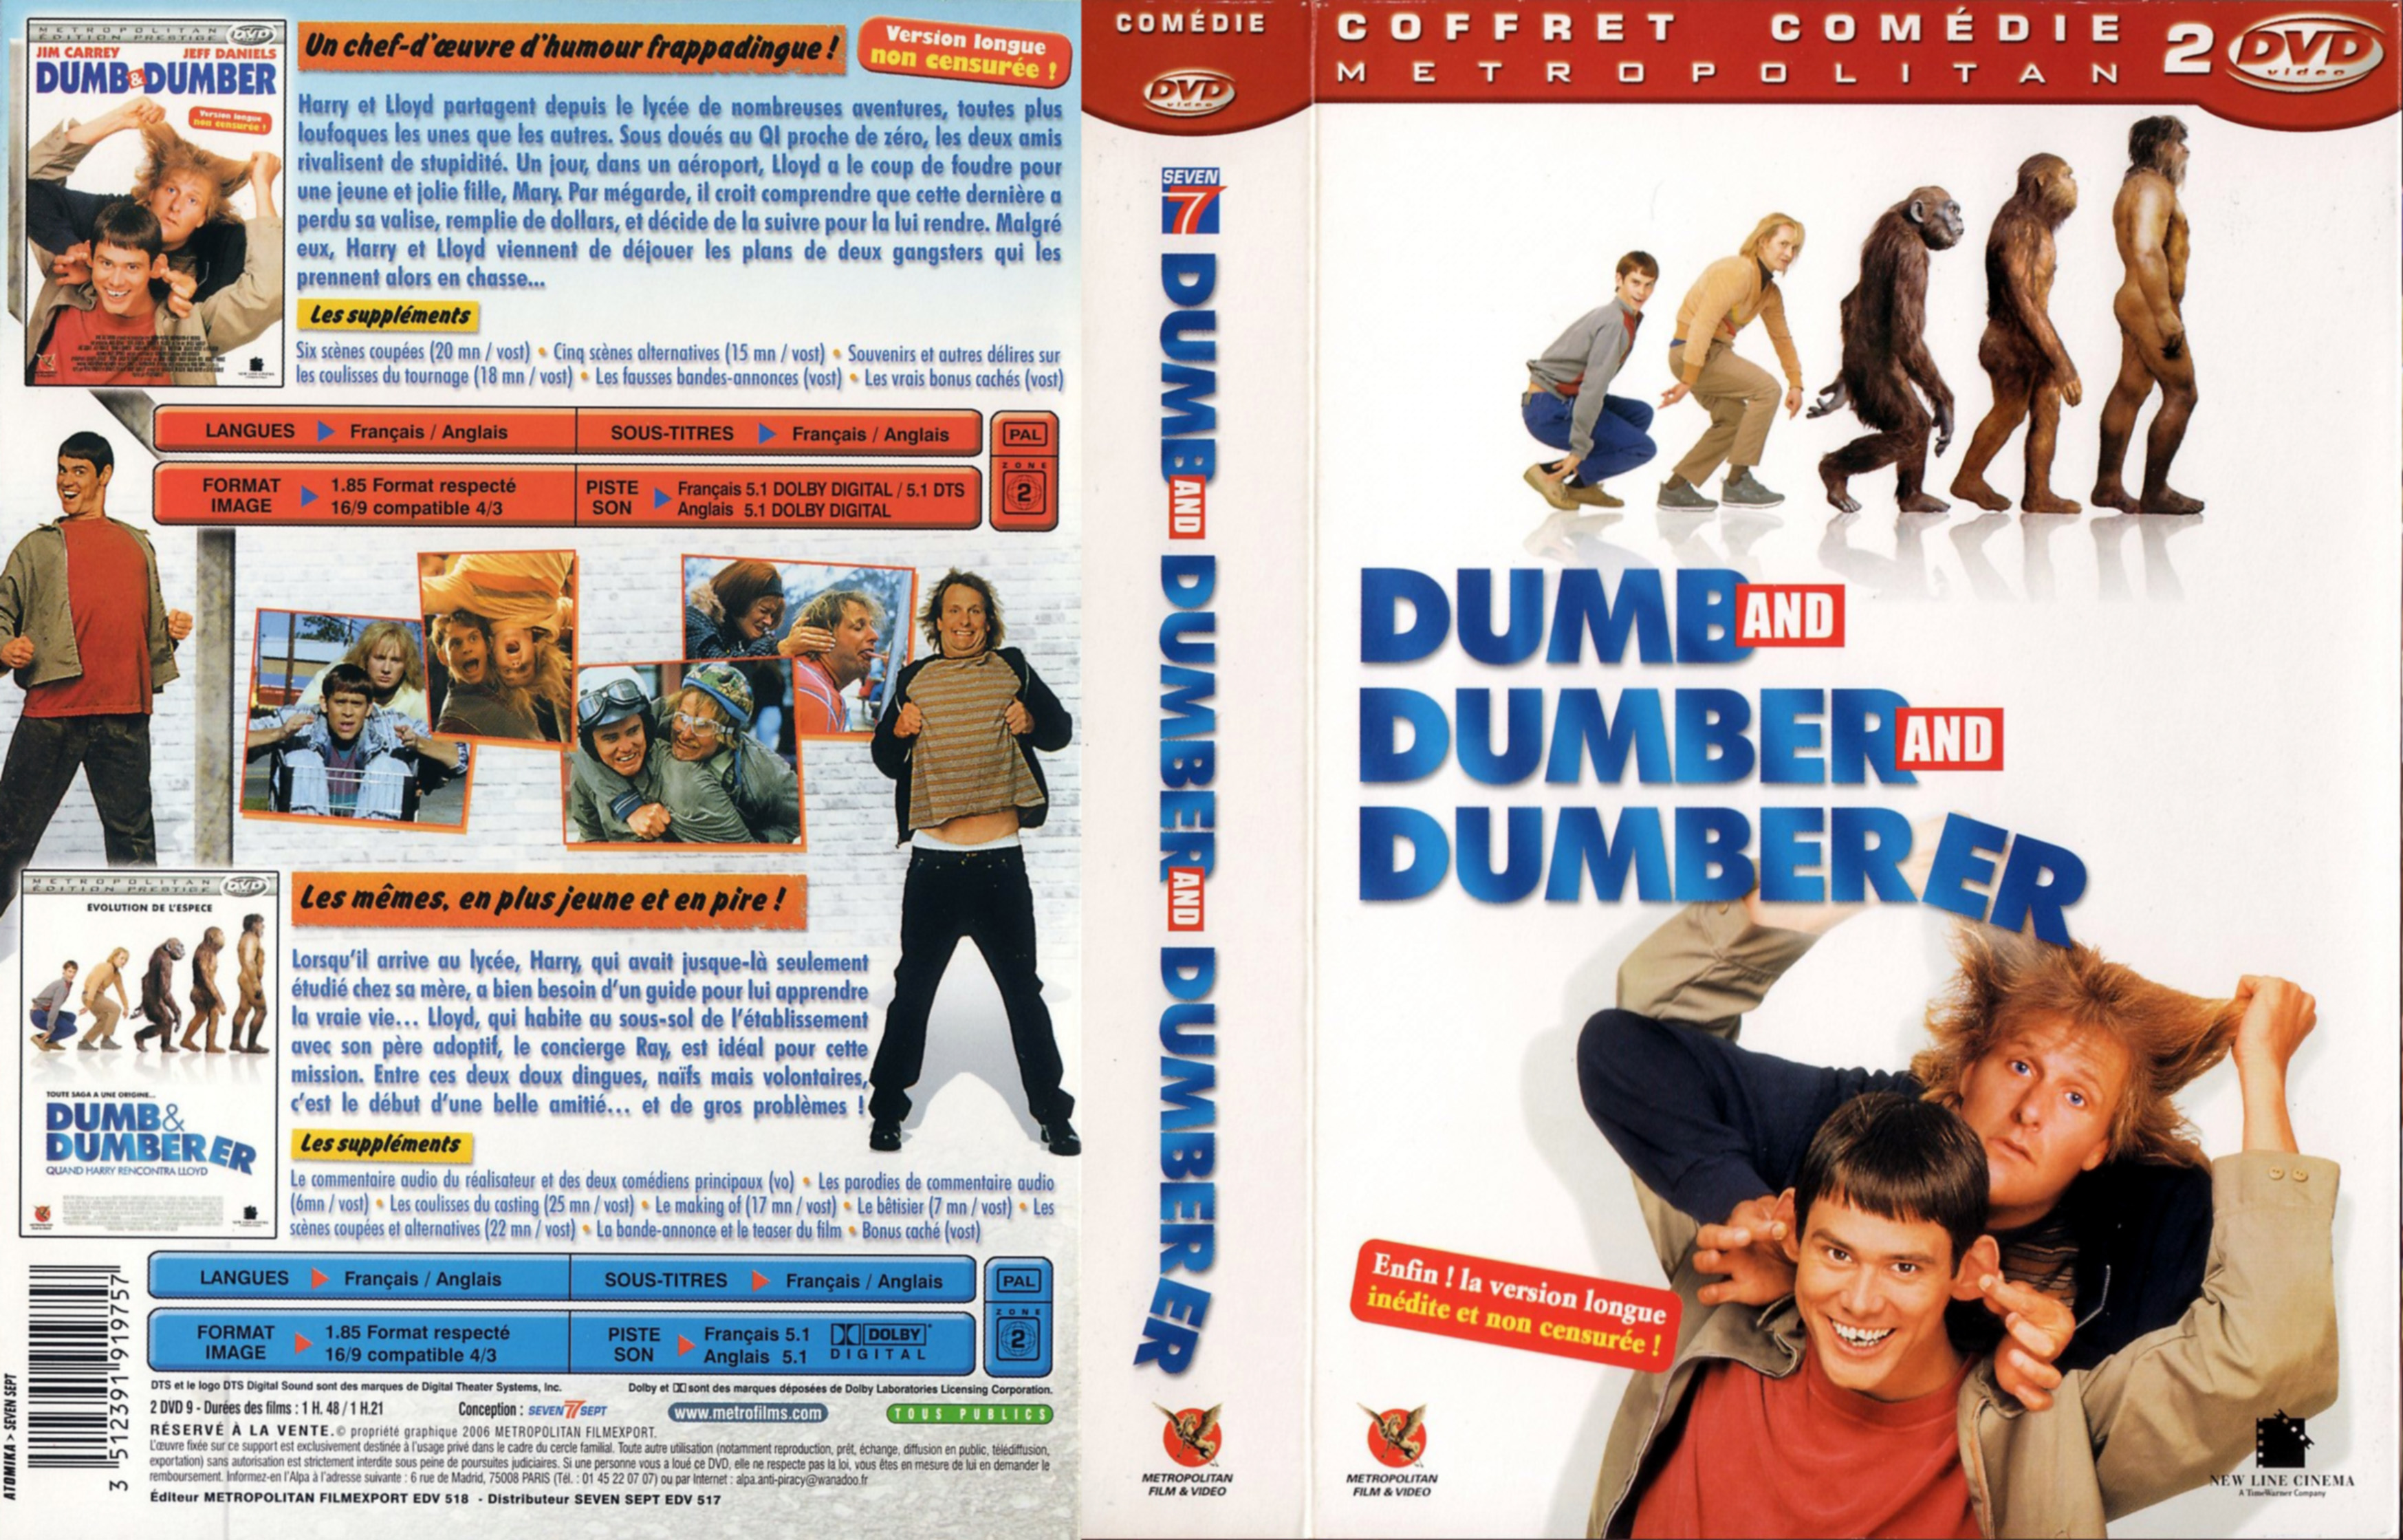 Jaquette DVD Dumb and dumber and dumberer